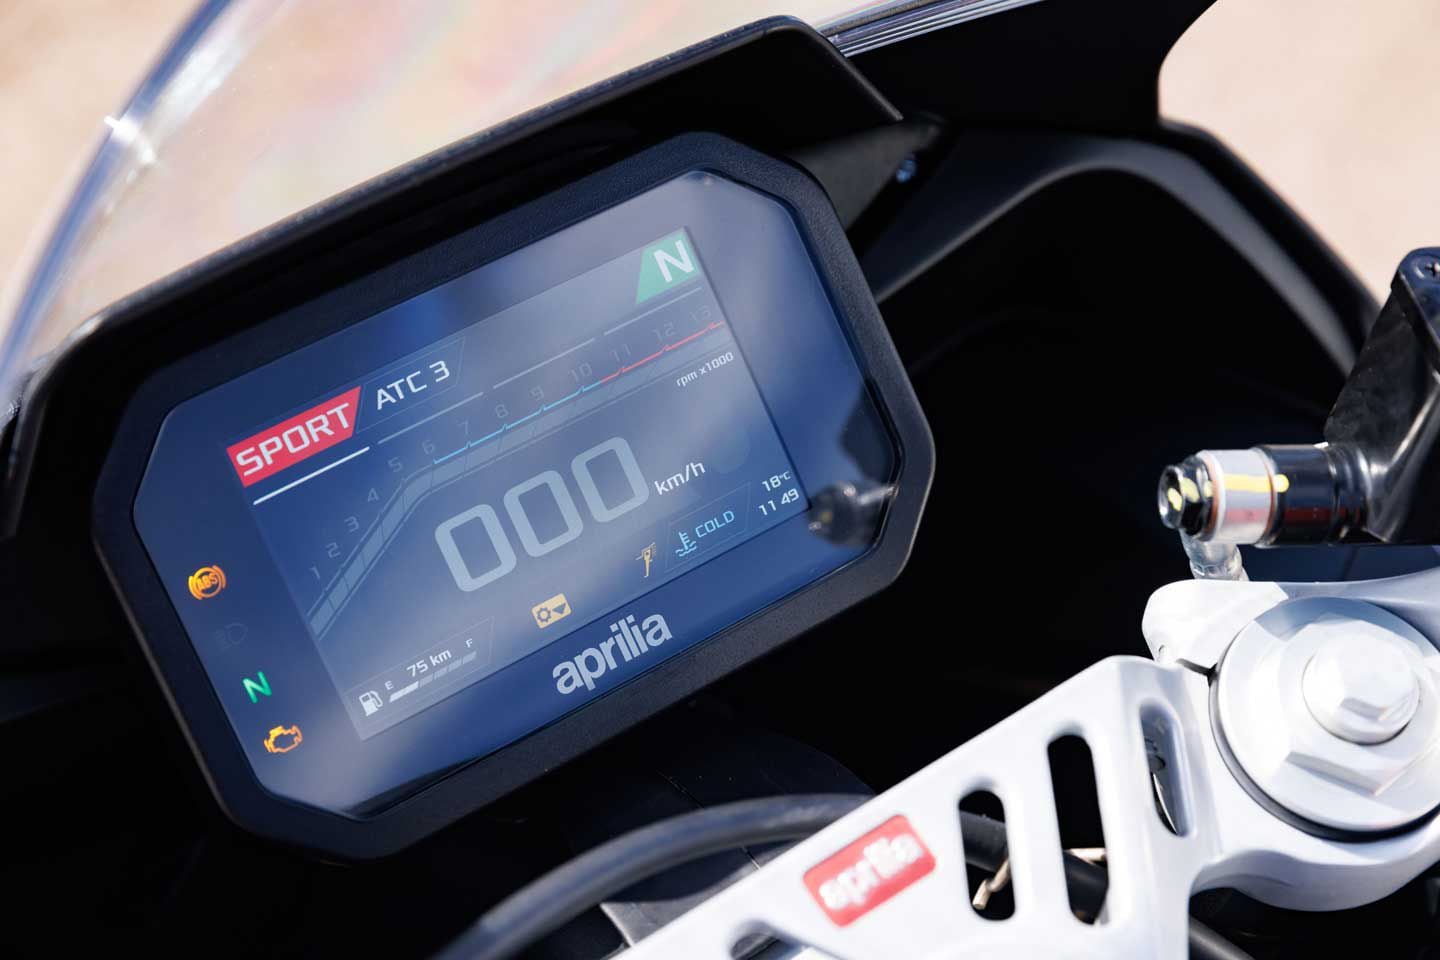 The Aprilia RS 457 comes equipped with a 5-inch TFT display with fonts and layouts similar to the RS 660 and RSV4.